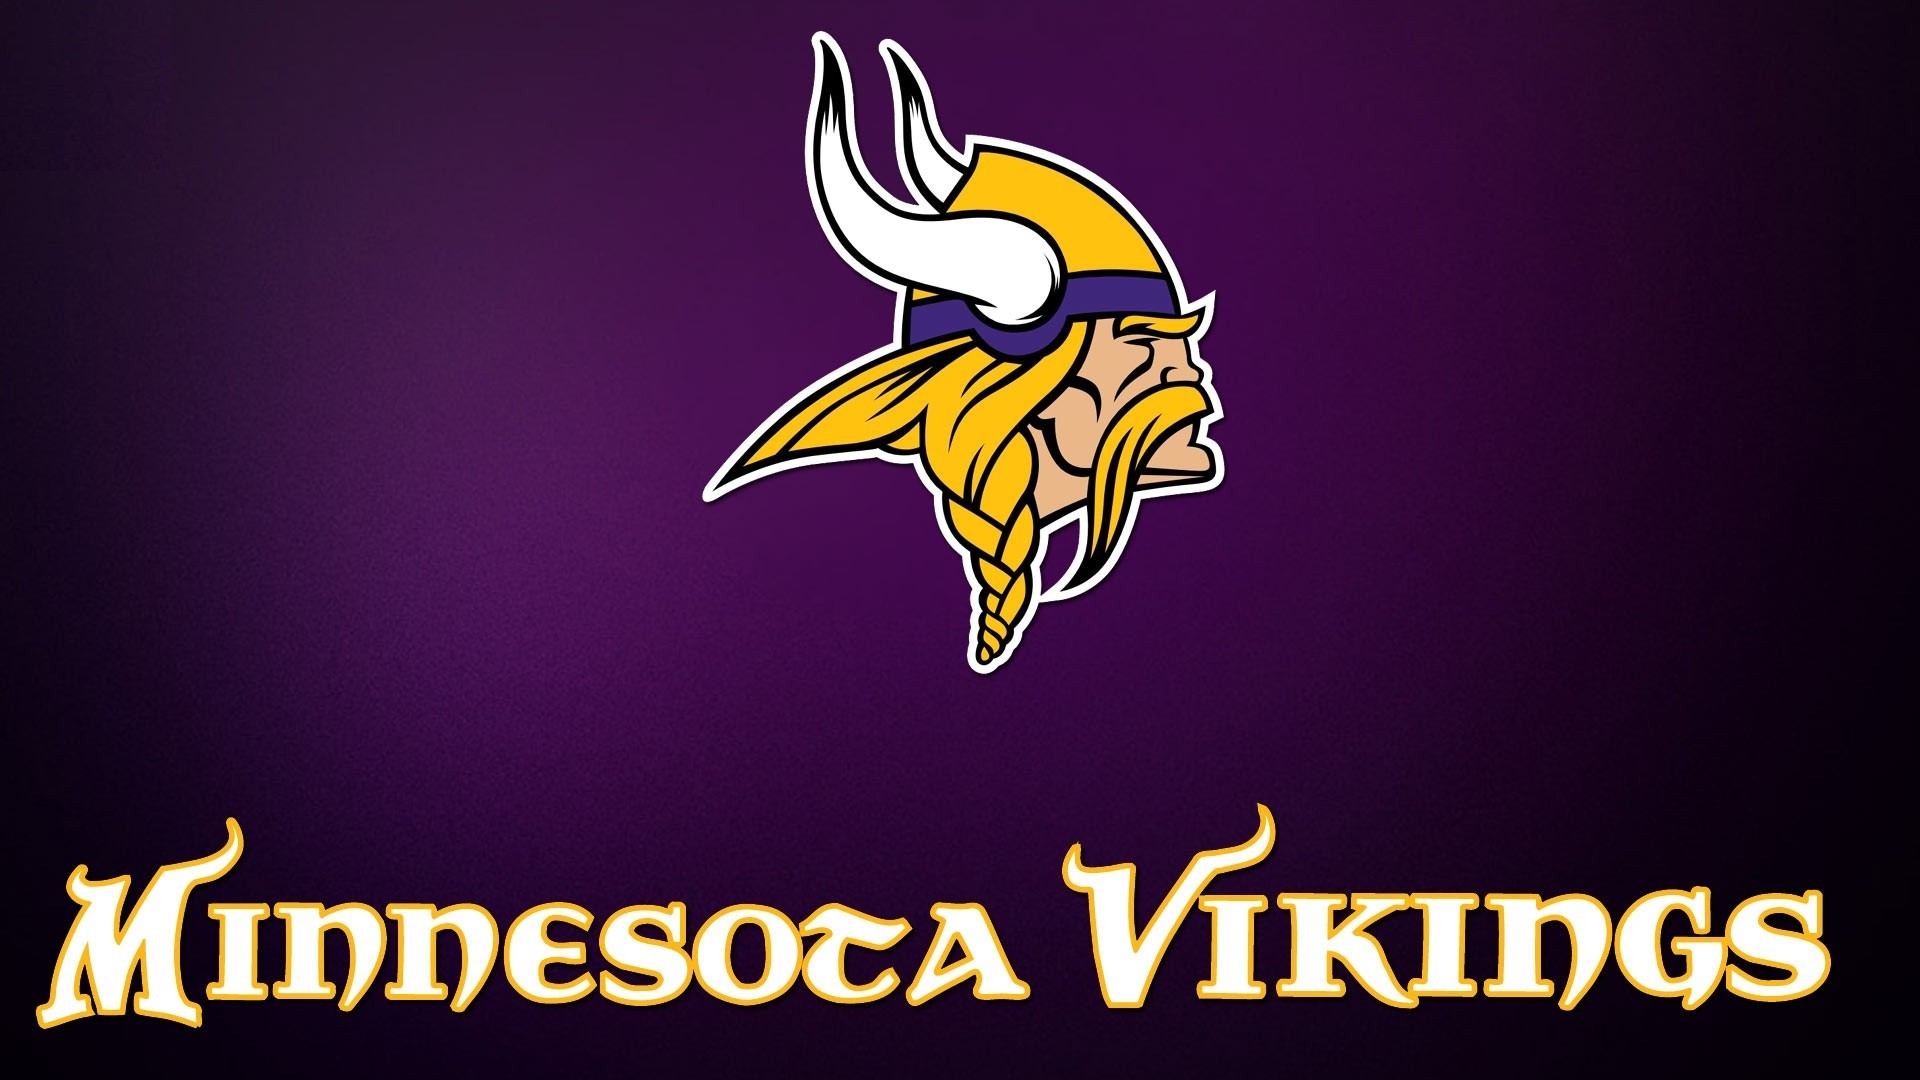 Minnesota Vikings NFL Wallpaper With high-resolution 1920X1080 pixel. You can use this wallpaper for your Mac or Windows Desktop Background, iPhone, Android or Tablet and another Smartphone device